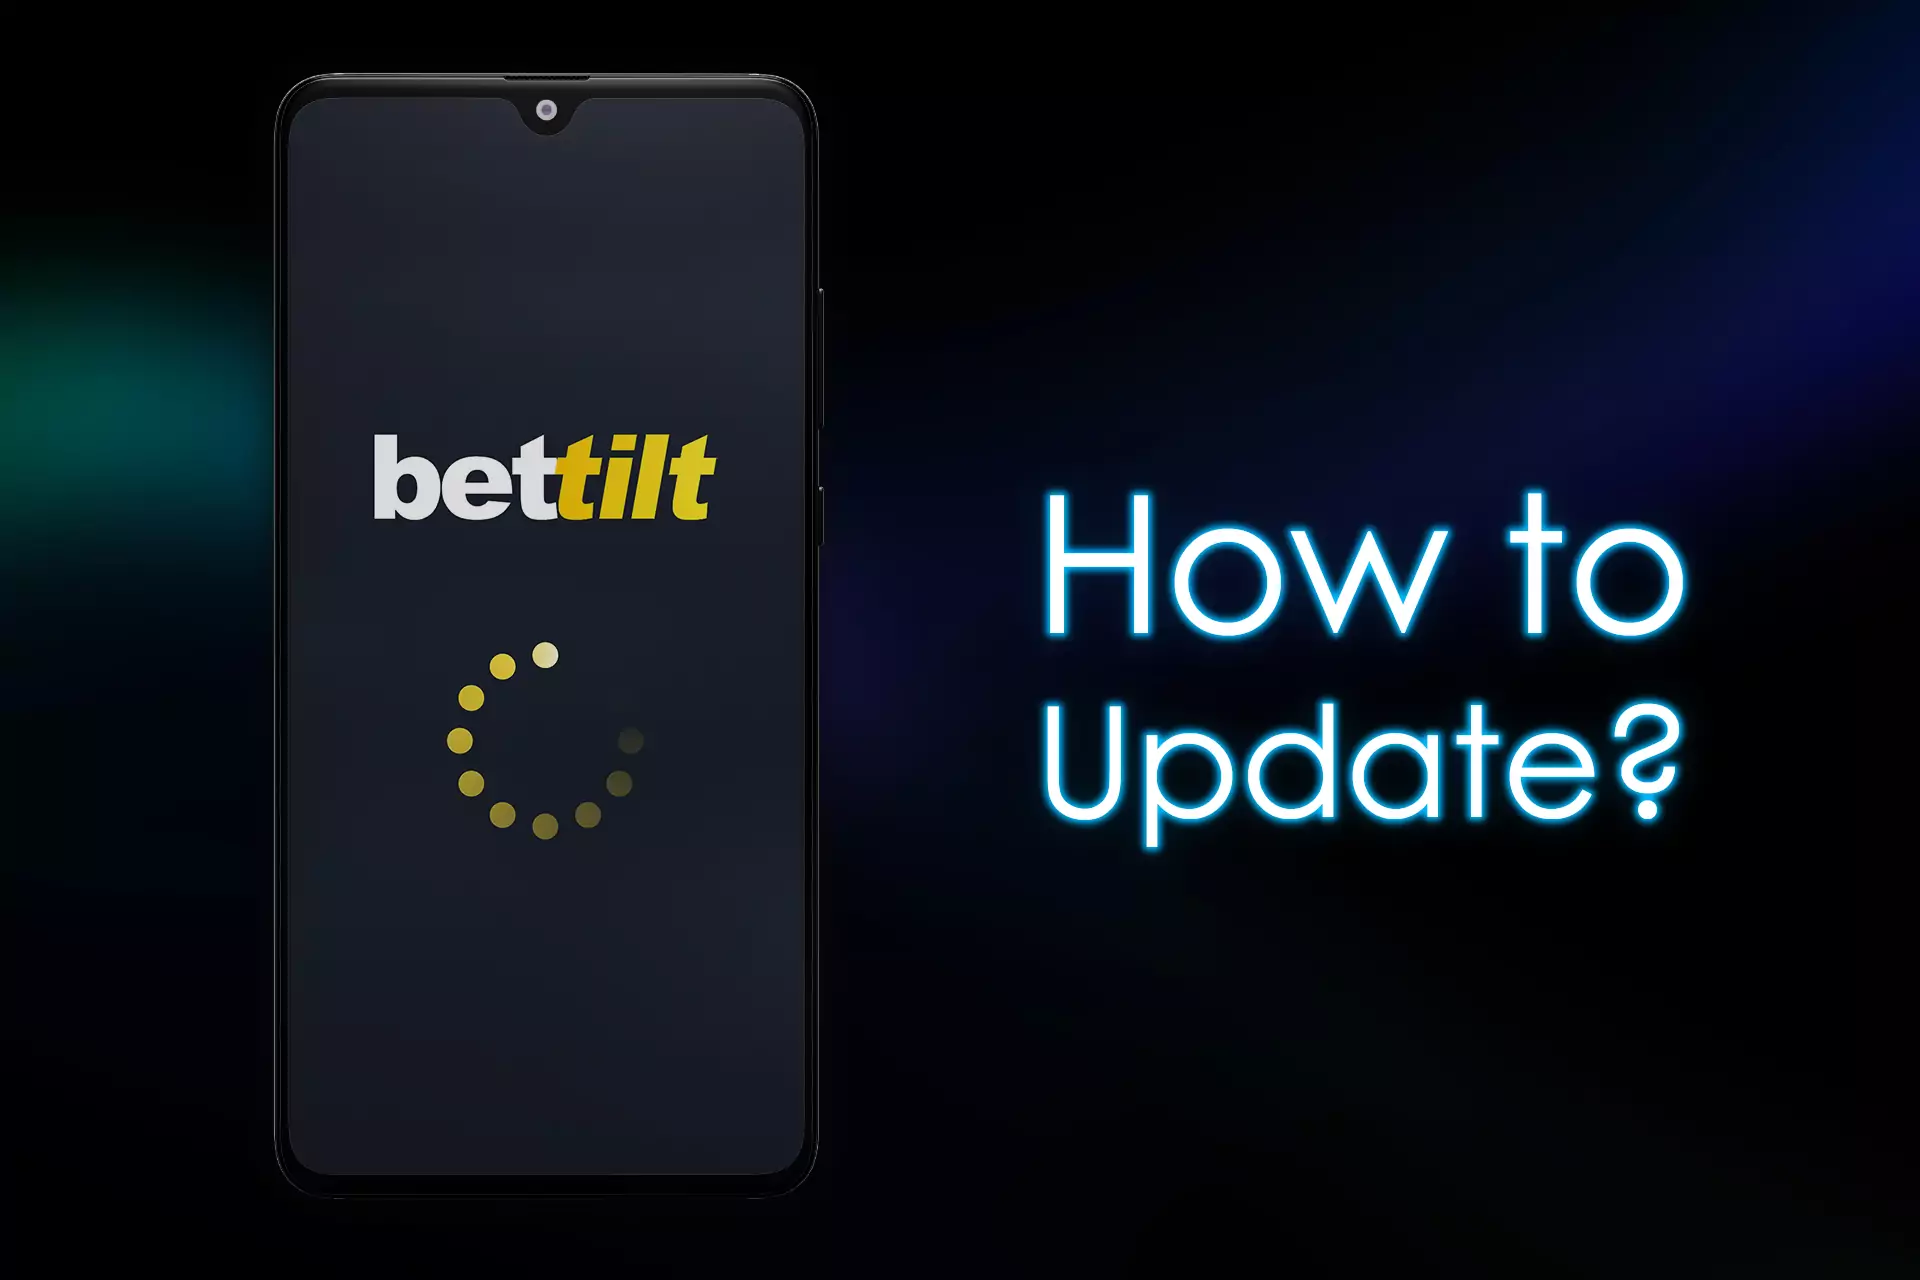 The Bettilt team regularly releases updates for the app that add new features and capabilities.